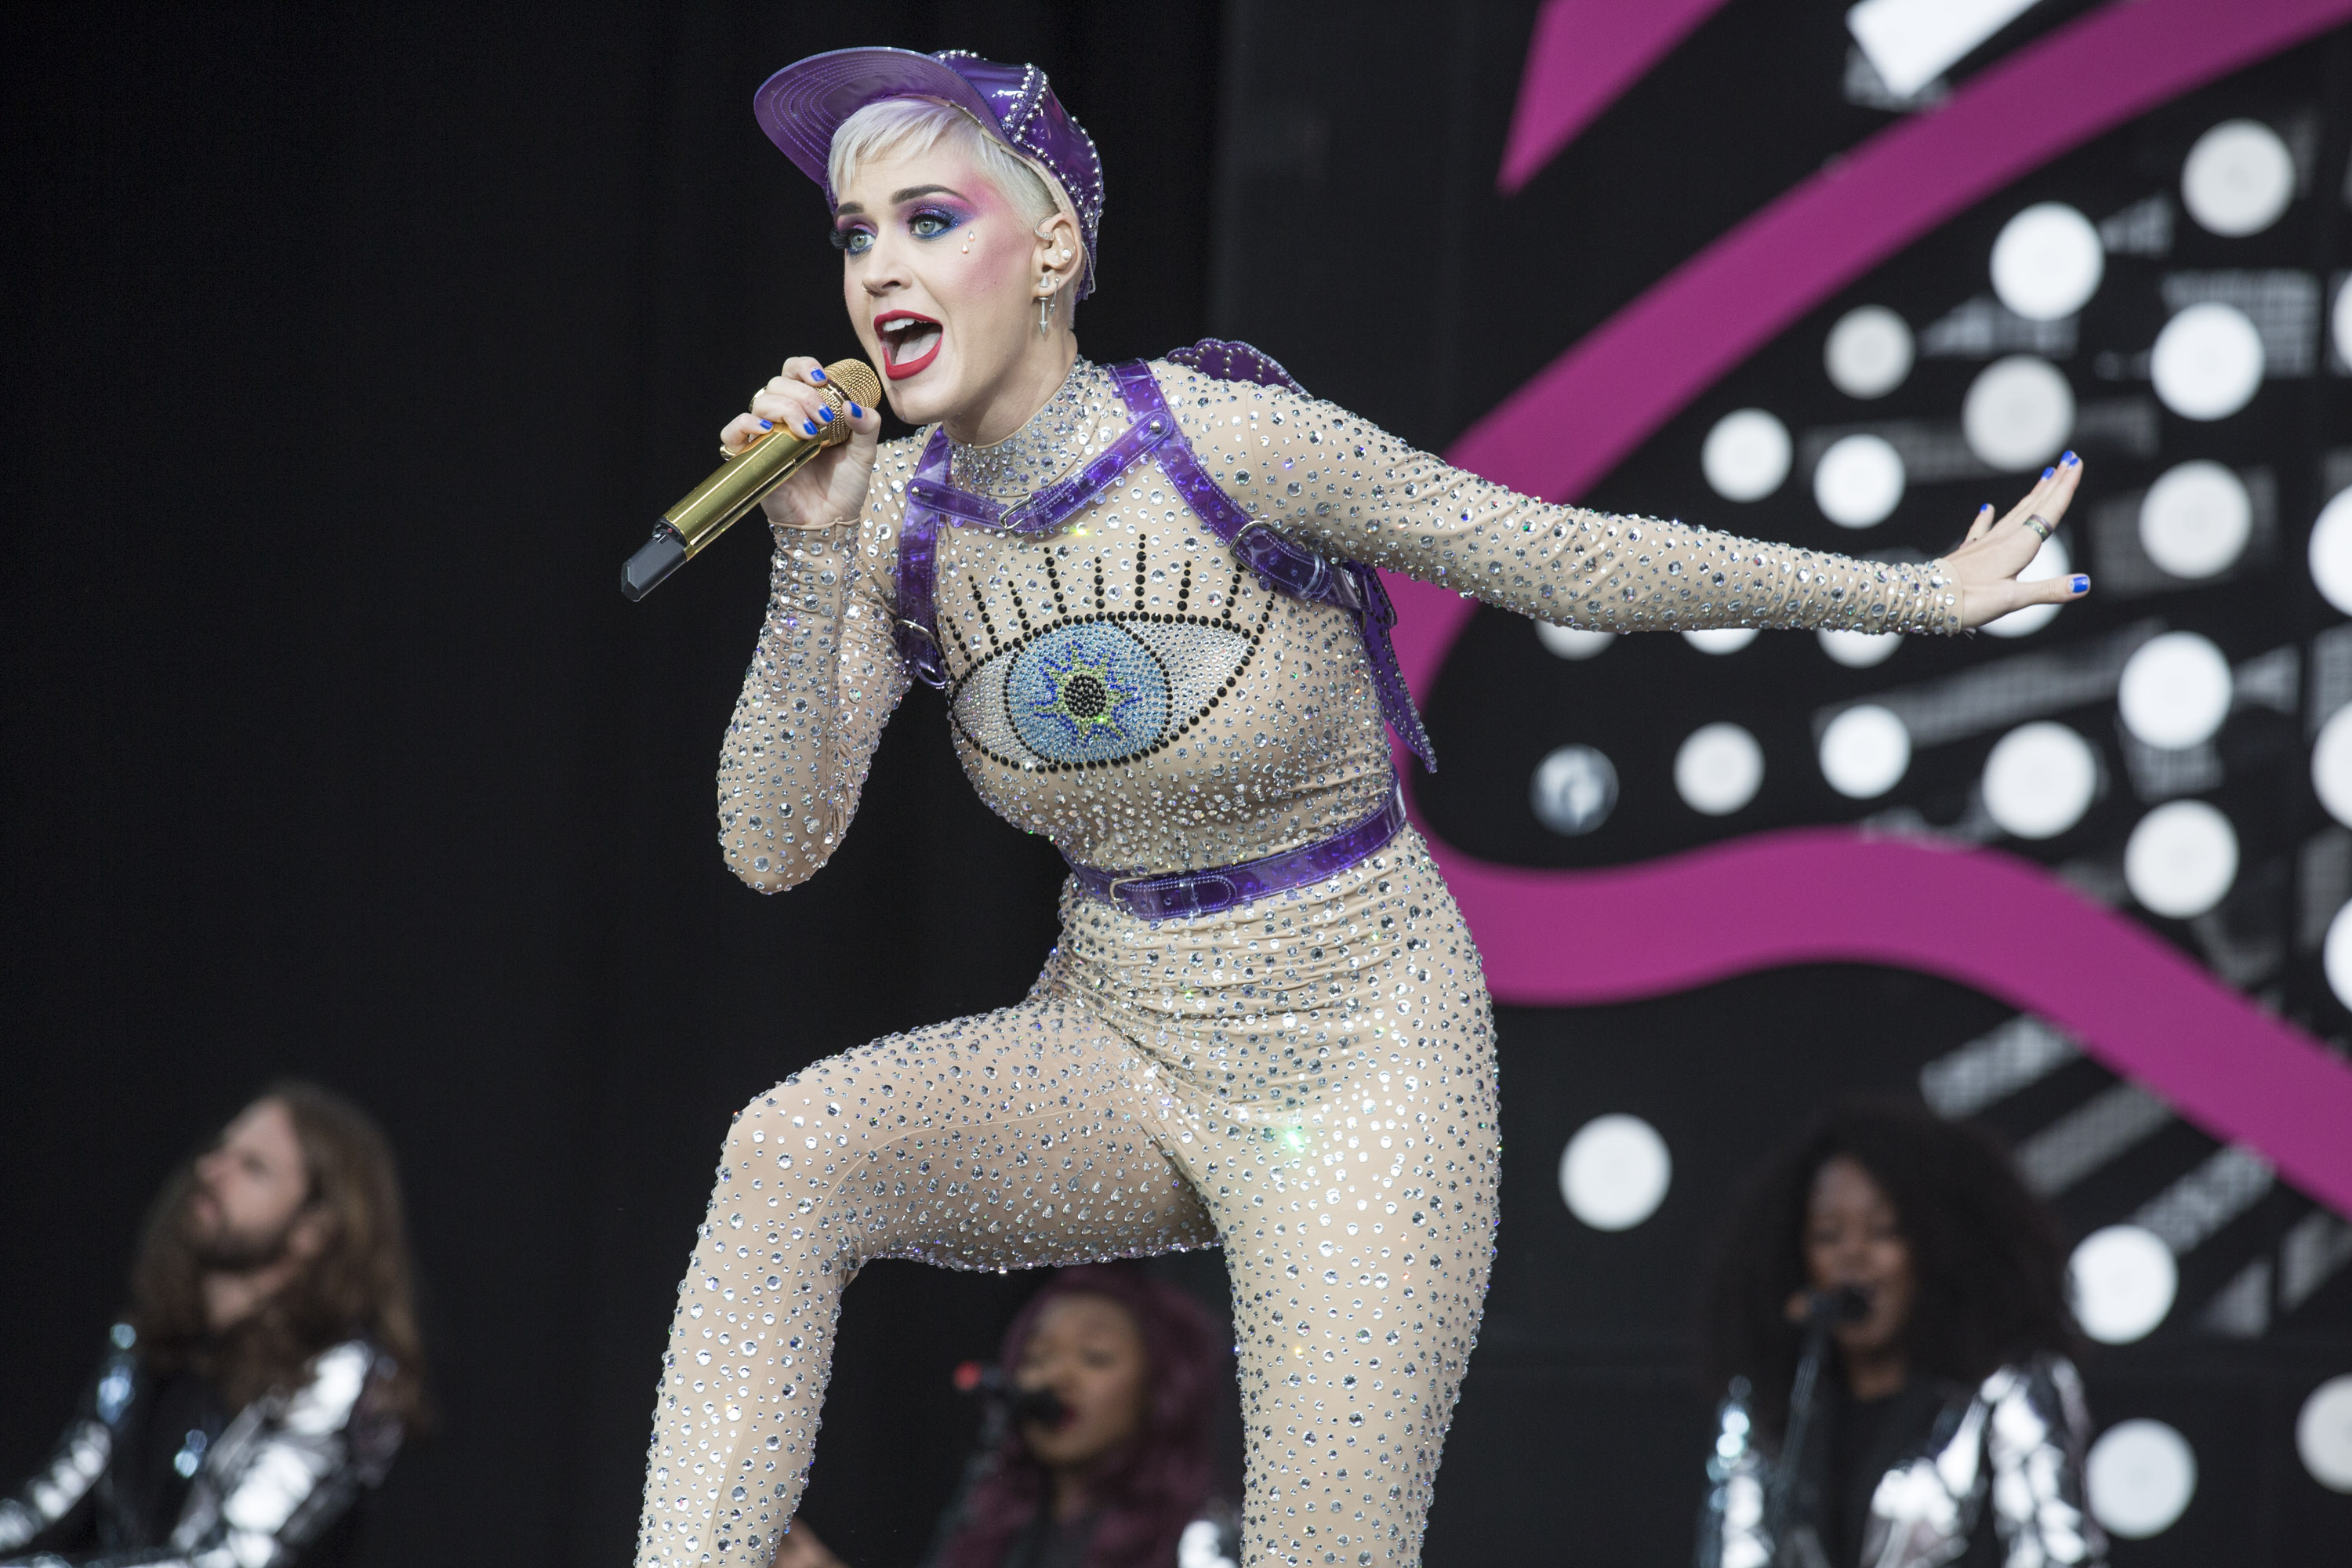 Katy Perry brings ridiculousness (and lots of it) to Glastonbury 2017